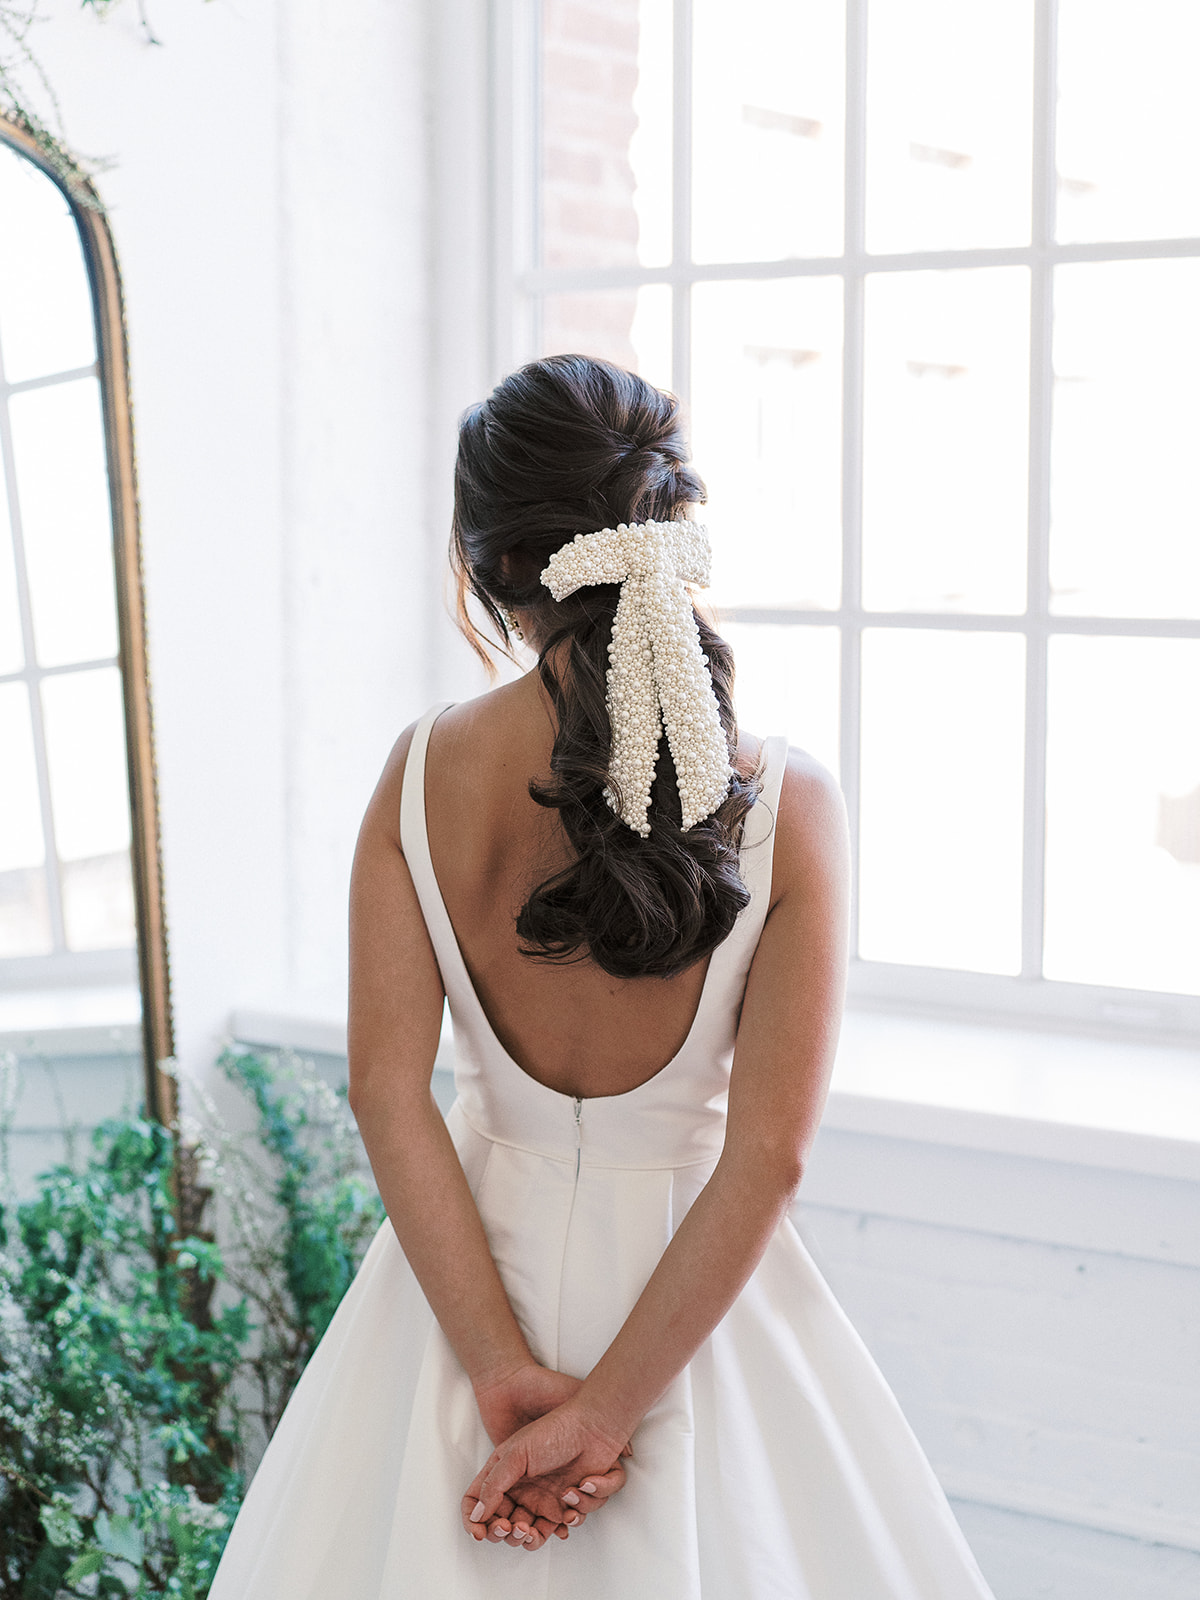 https://withlovecaila.com/wp-content/uploads/2021/04/Caila-Quinn-NYC-Bridal-Styled-Shoot-Kylee-Yee-67.jpg